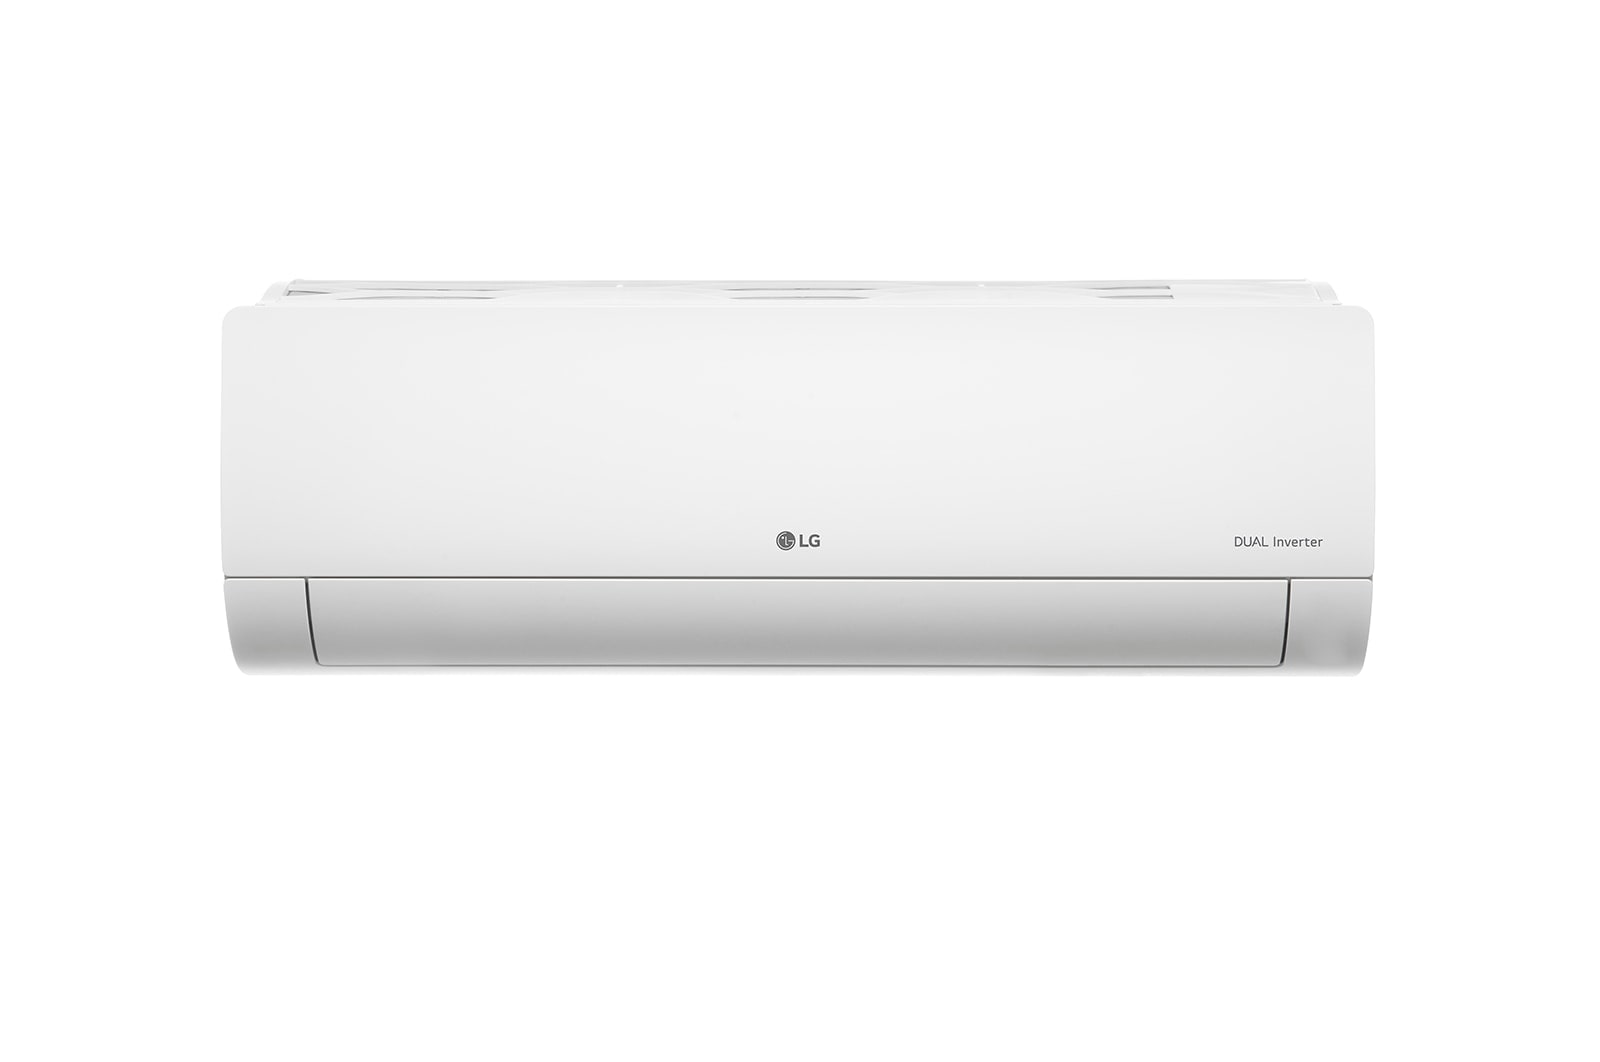 LG RS-Q19ZWZF split air conditioner front view